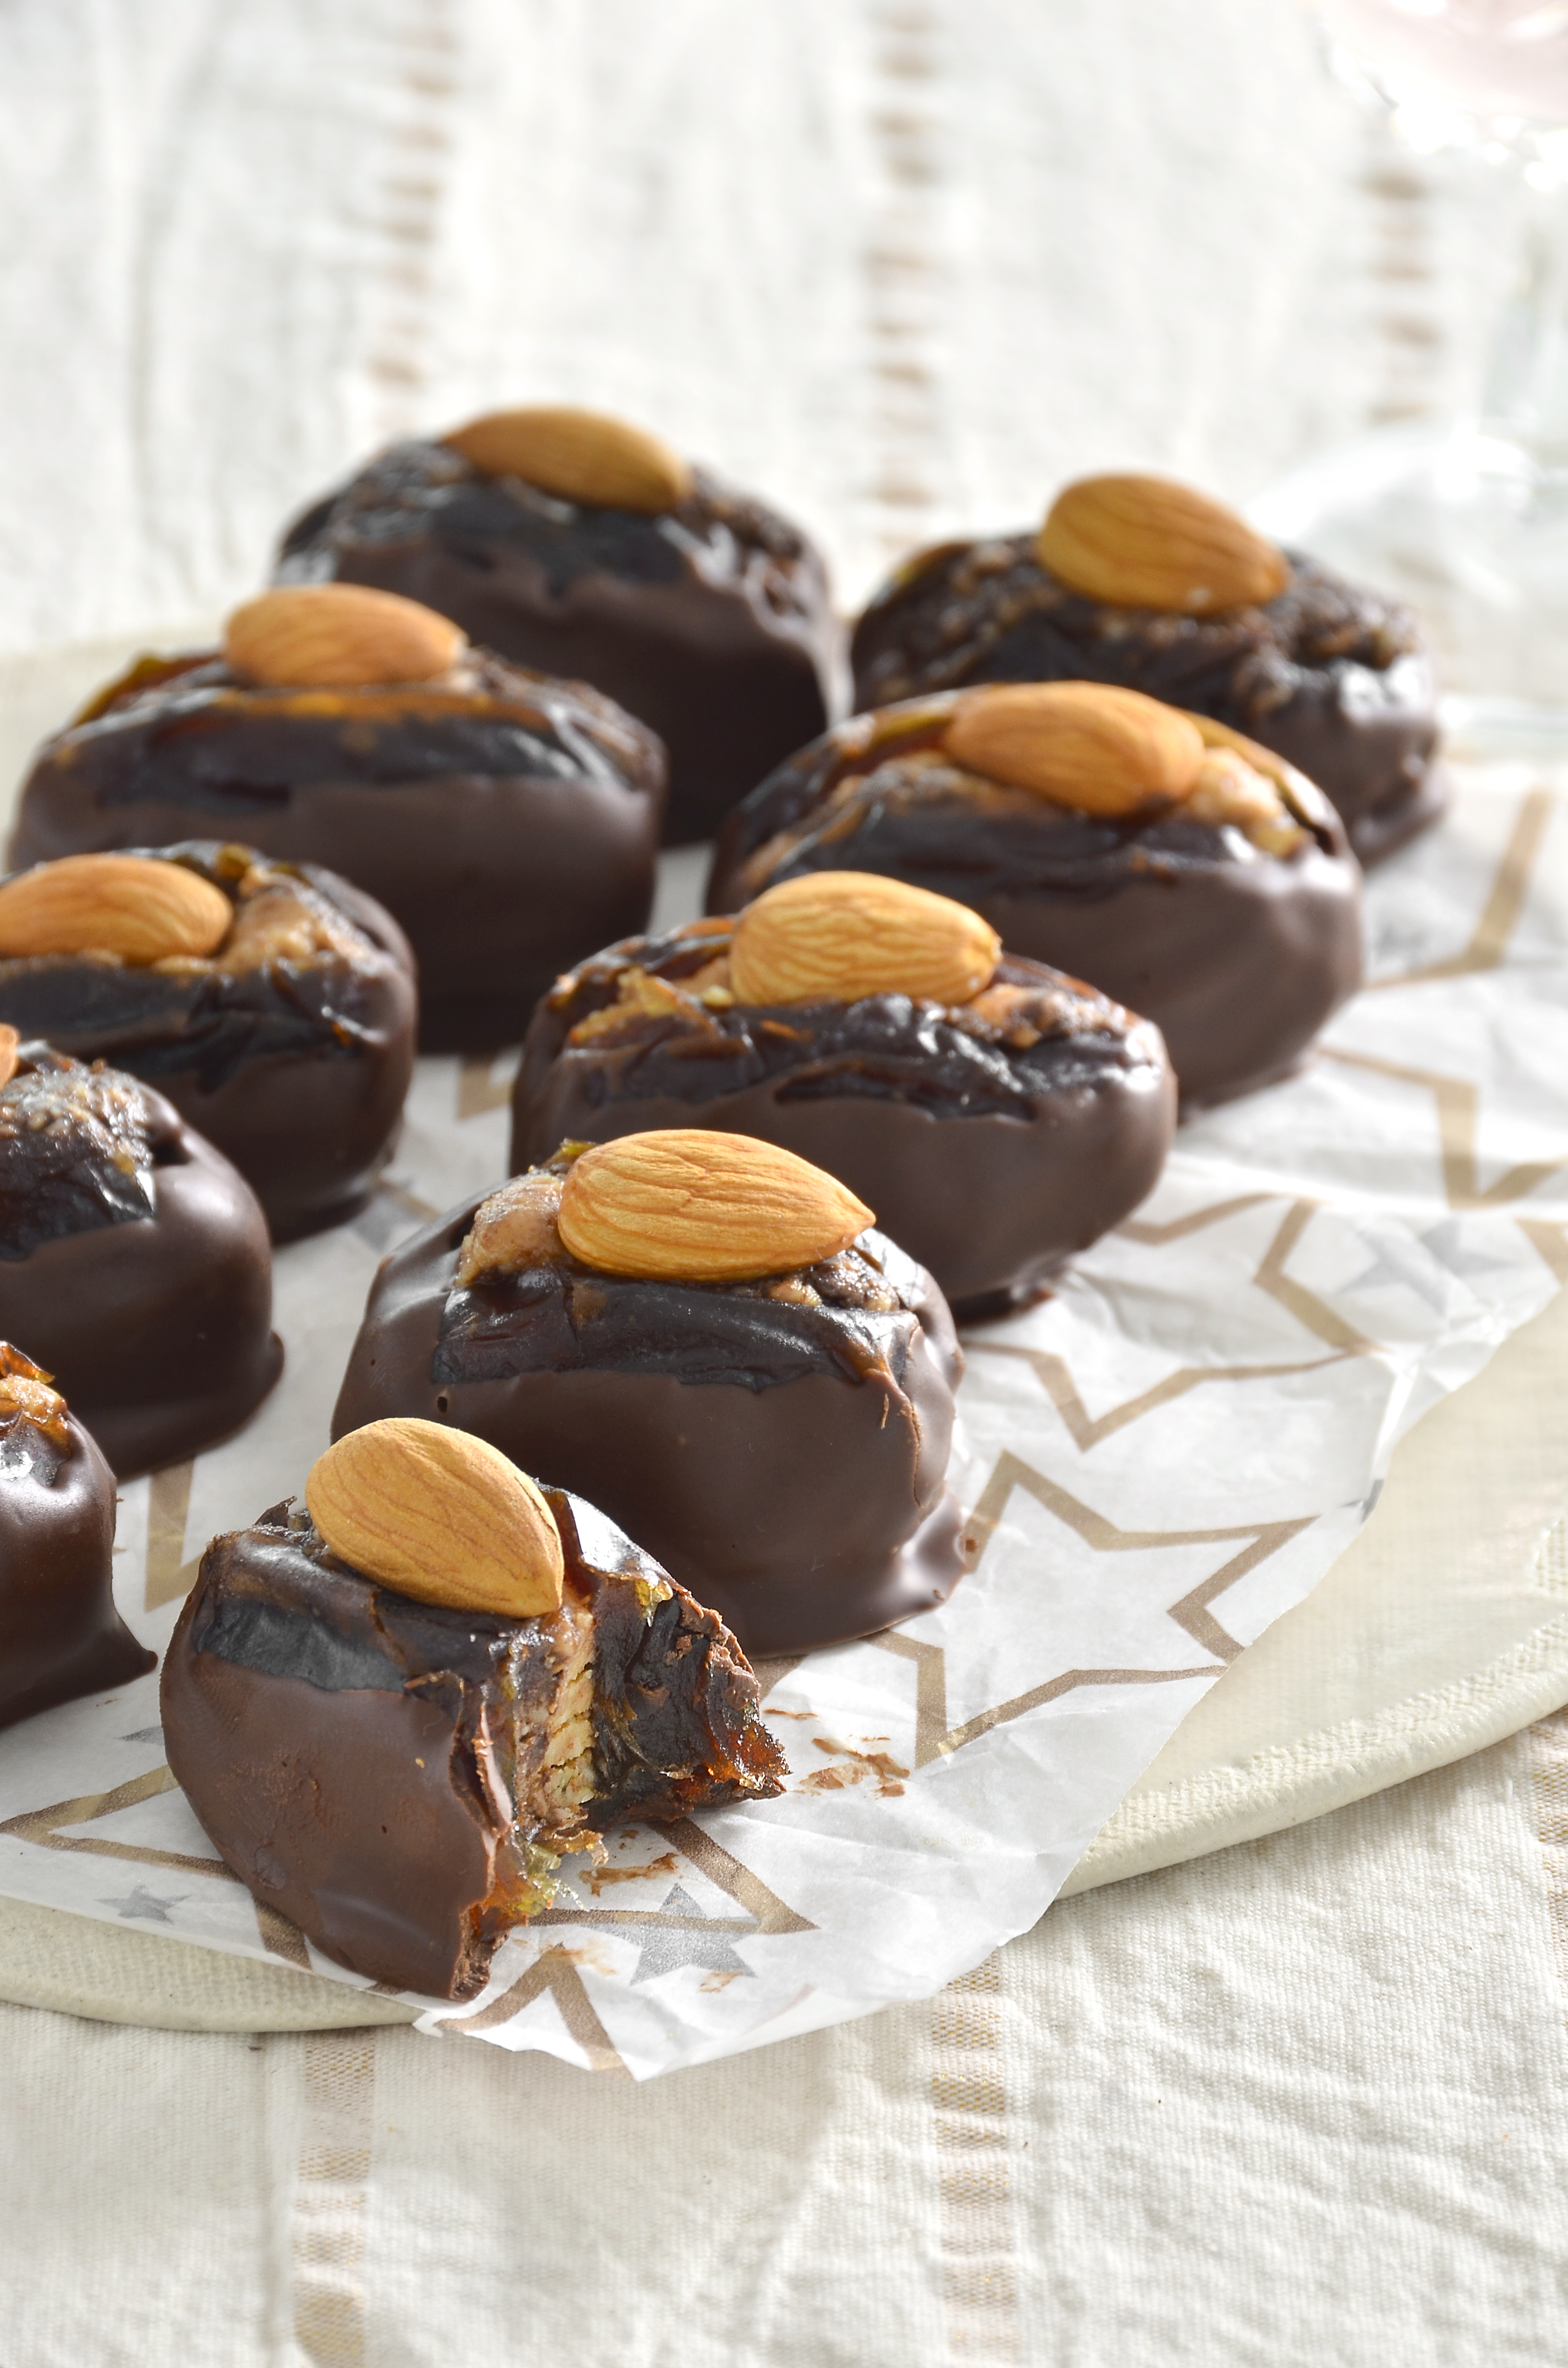 Dates are rich in iron, potassium, calcium and magnesium and are an important source of fiber